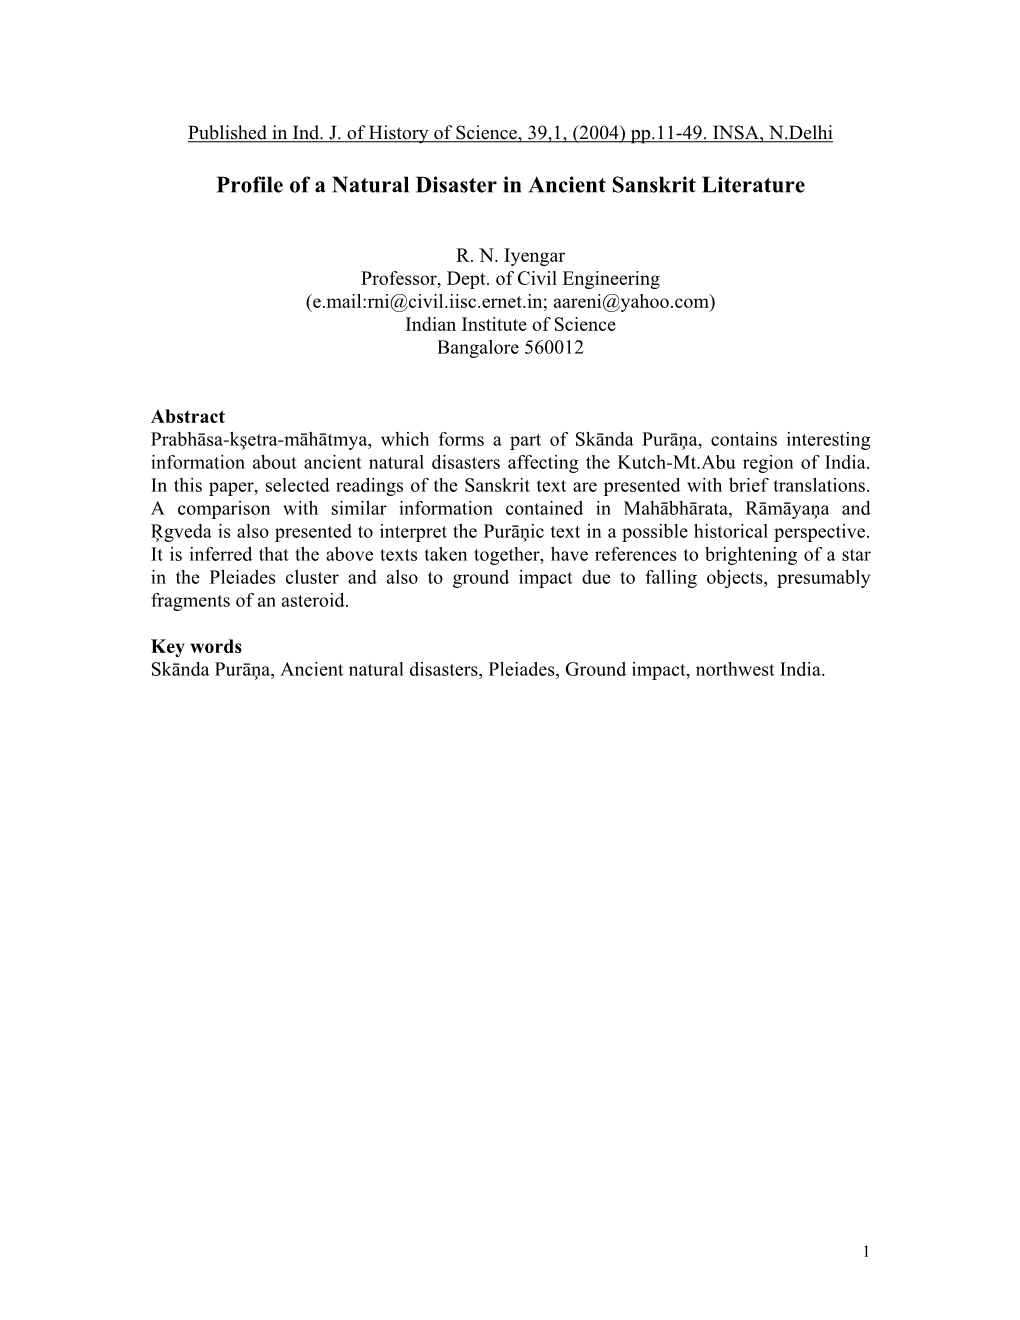 Profile of a Natural Disaster in Ancient Sanskrit Literature